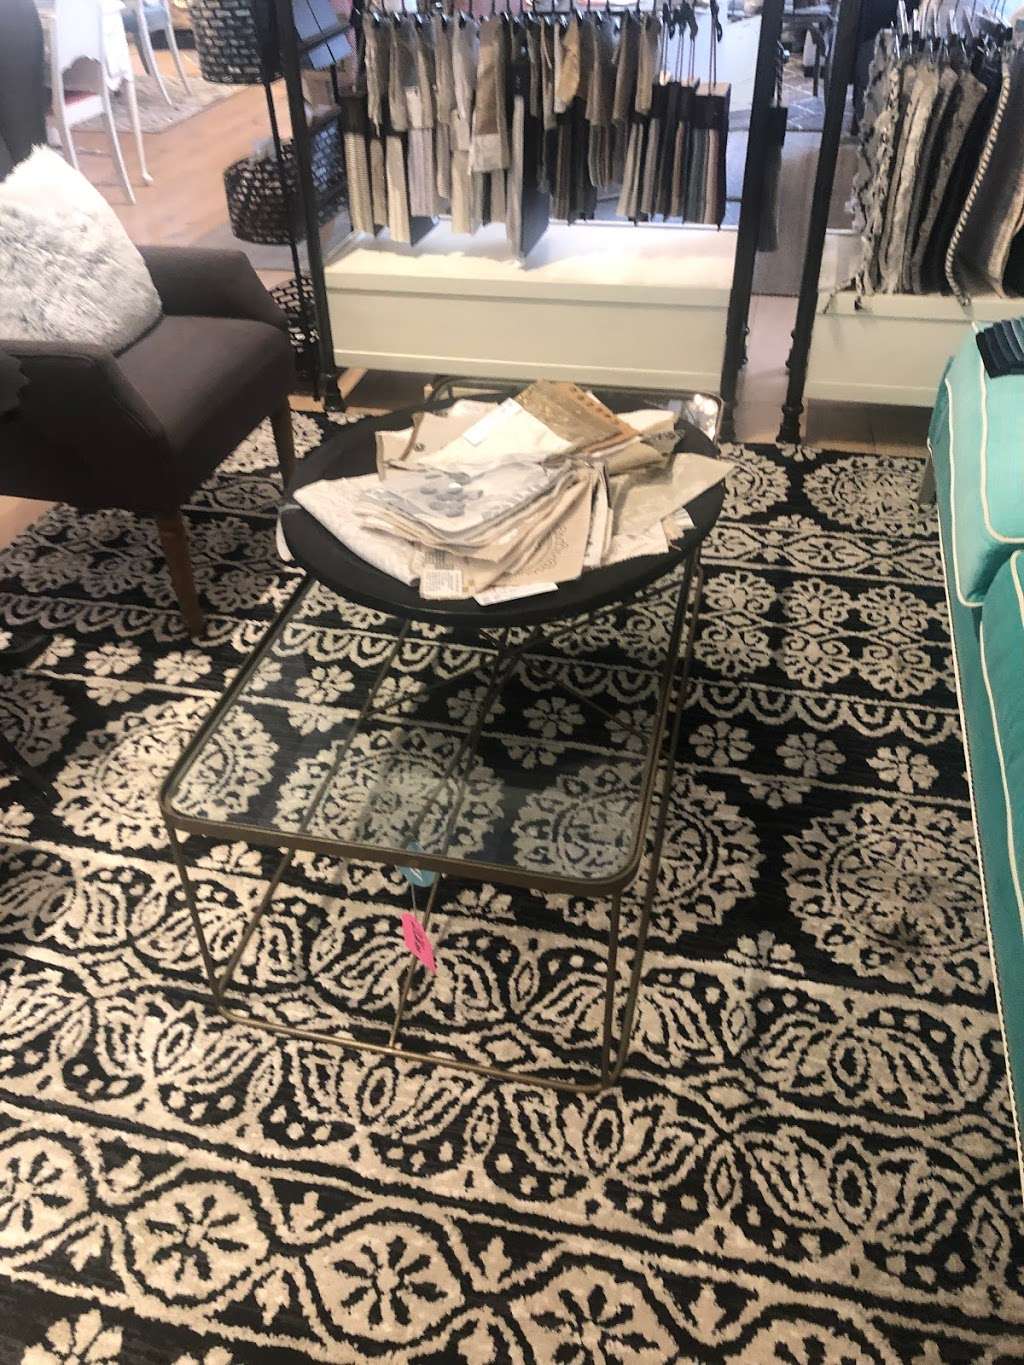 Simply Stunning Rugs 7050 Miramar Rd, Rugs At Home Goods